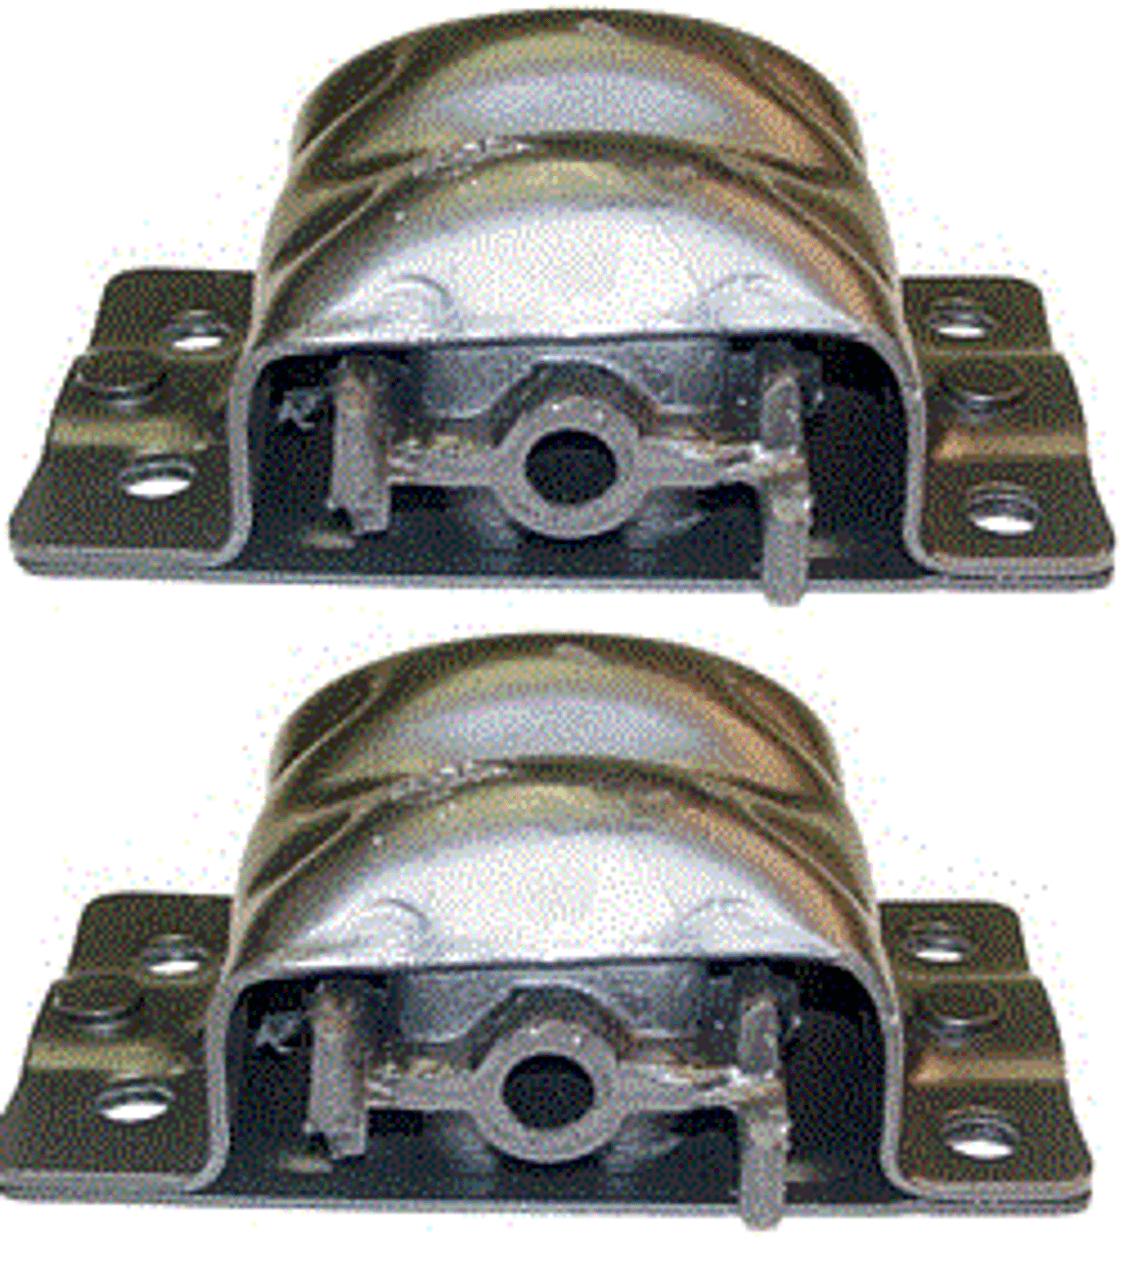 Dirty Dingo Clam Shell Mounts for LS1 67-72 GM Truck 4X4 Cross Member Pair